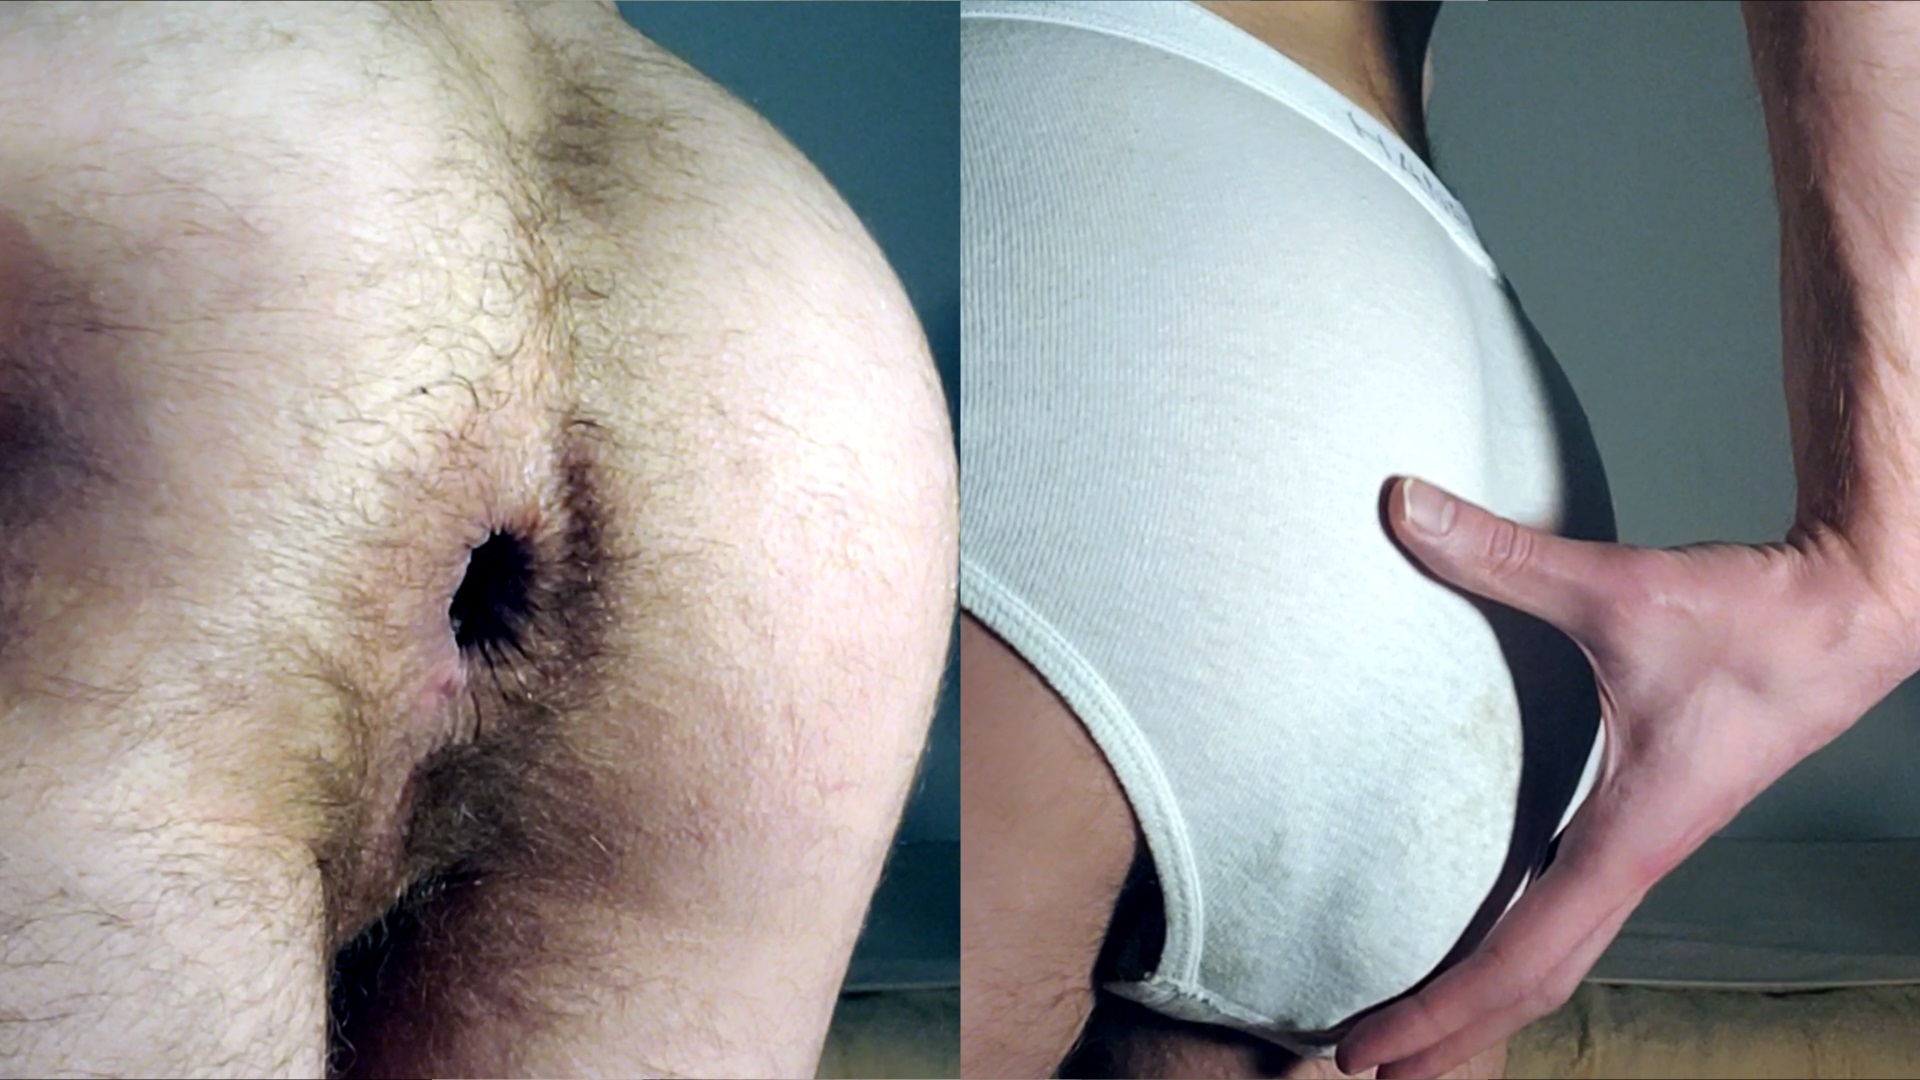 Guy shows bloated hole, then destroys briefs